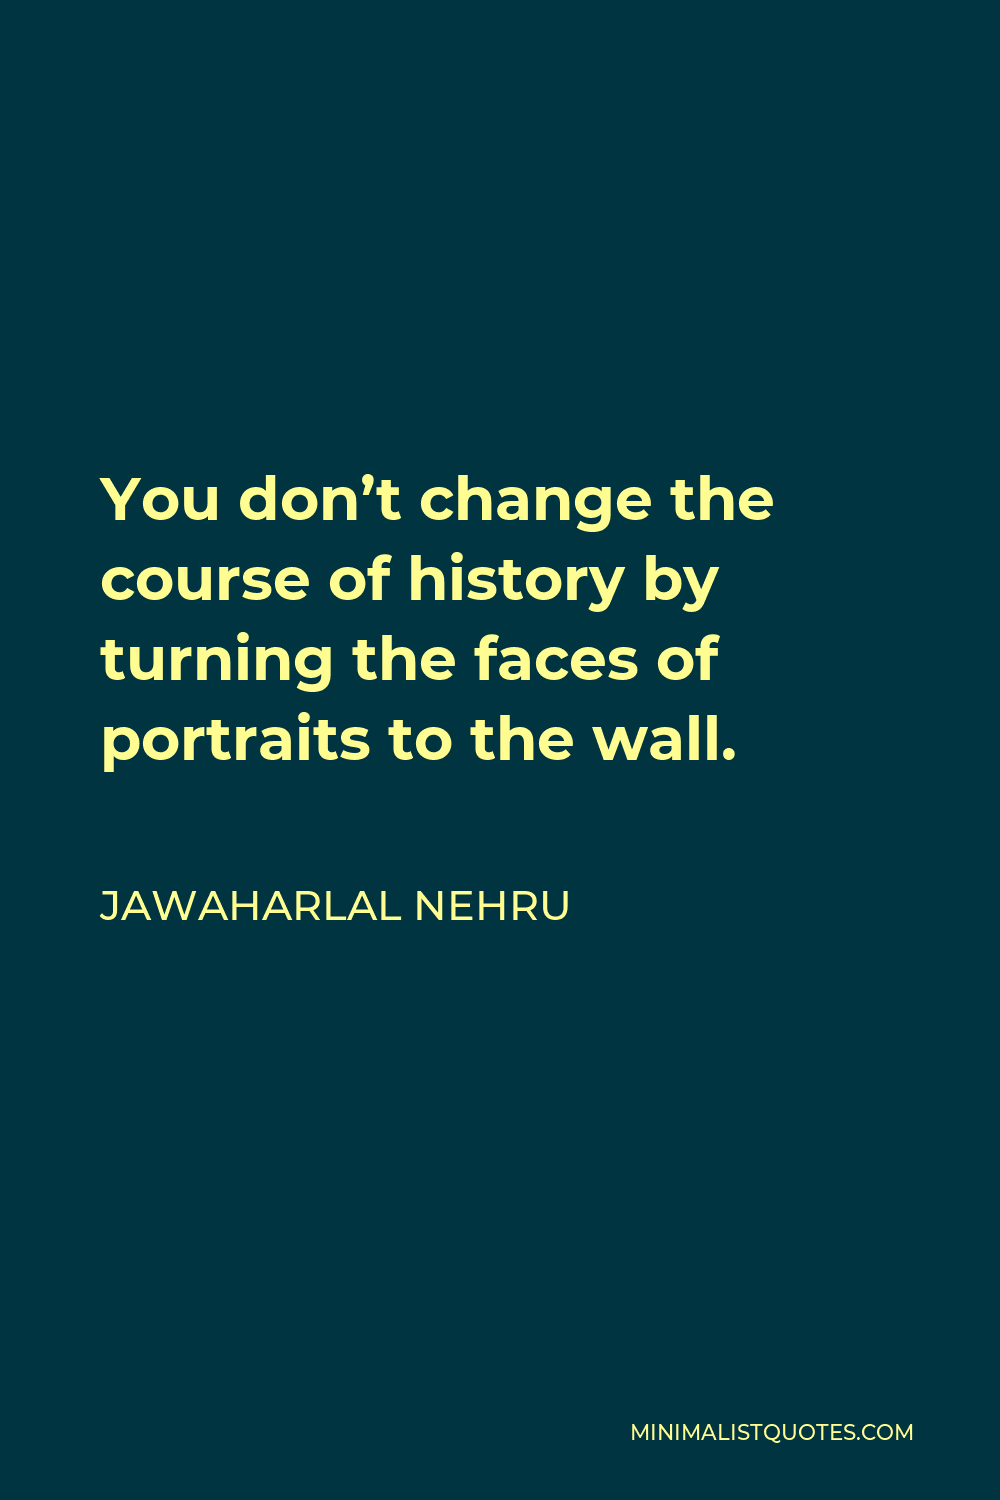 Jawaharlal Nehru Quote - You don’t change the course of history by turning the faces of portraits to the wall.